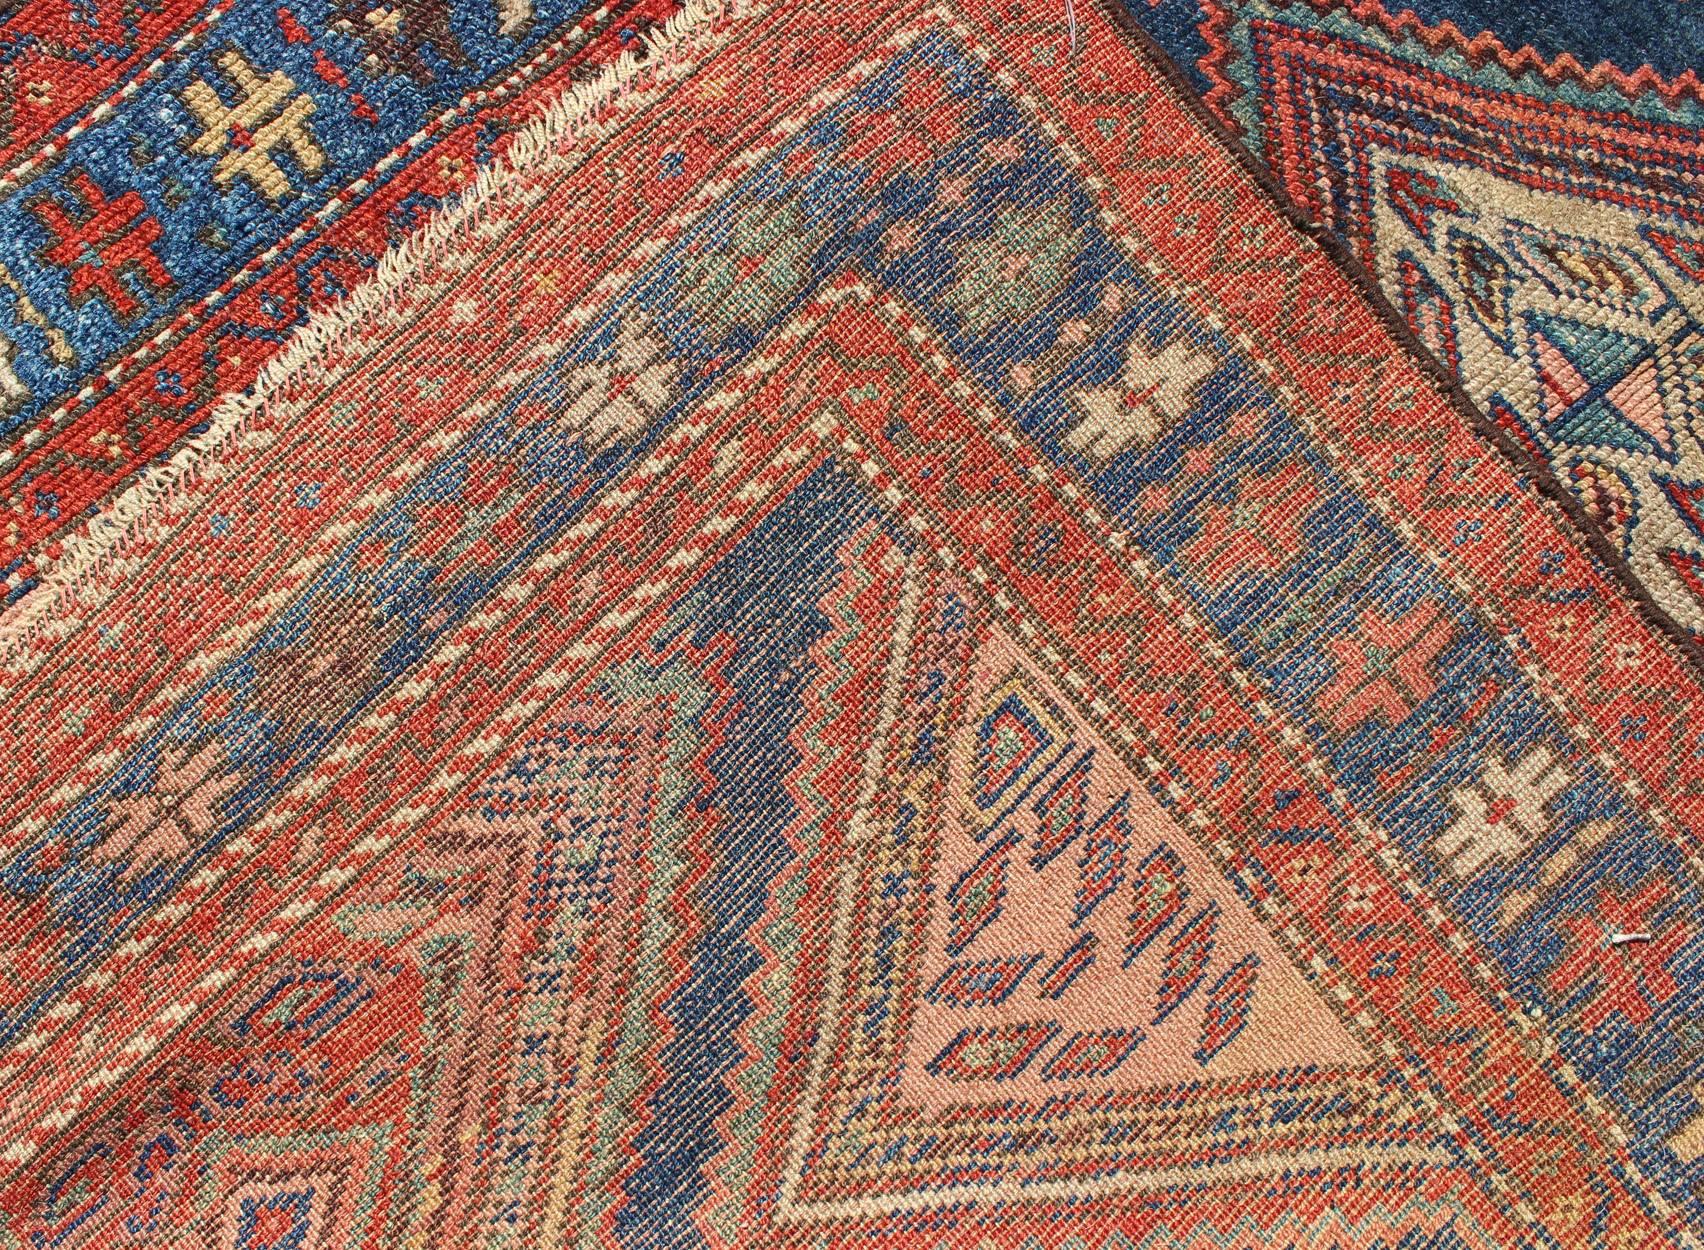 Antique N.W. Persian Malayer Tribal Rug with Diamond Design 1